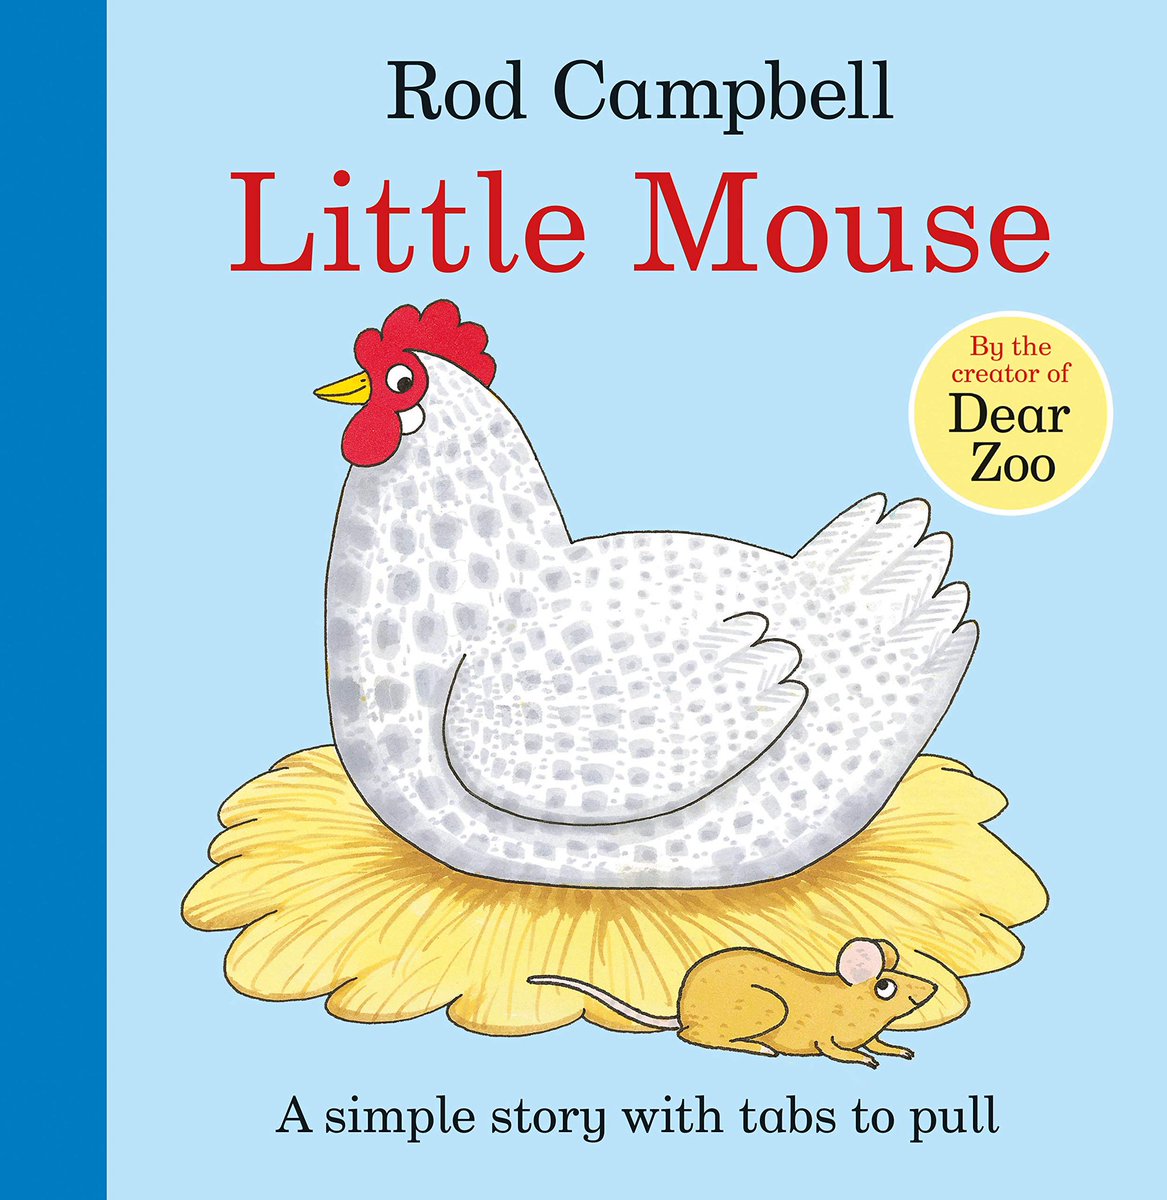 No.45  #LibraryTop50 Rod Campbell got a doctorate in organic chemistry before he set up his own publishing house, eventually bought by Macmillan. His pages, often with flaps, are clear and simple for toddlers to decode, making room for them to chime in https://en.m.wikipedia.org/wiki/Rod_Campbell